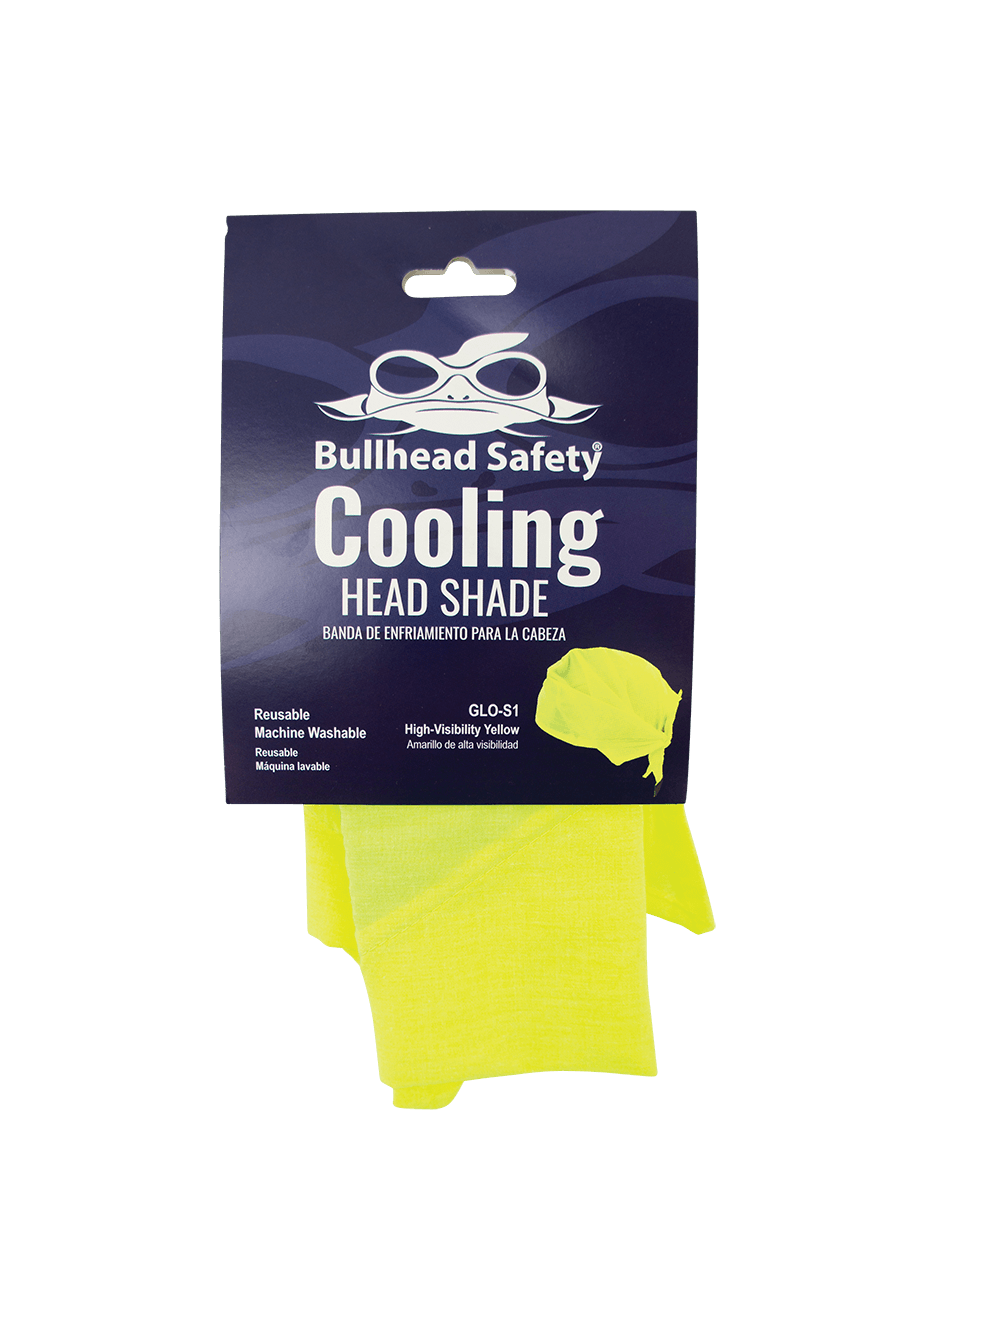 Bullhead Safety® Cooling High-Visibility Cooling Head Shade - GLO-S1